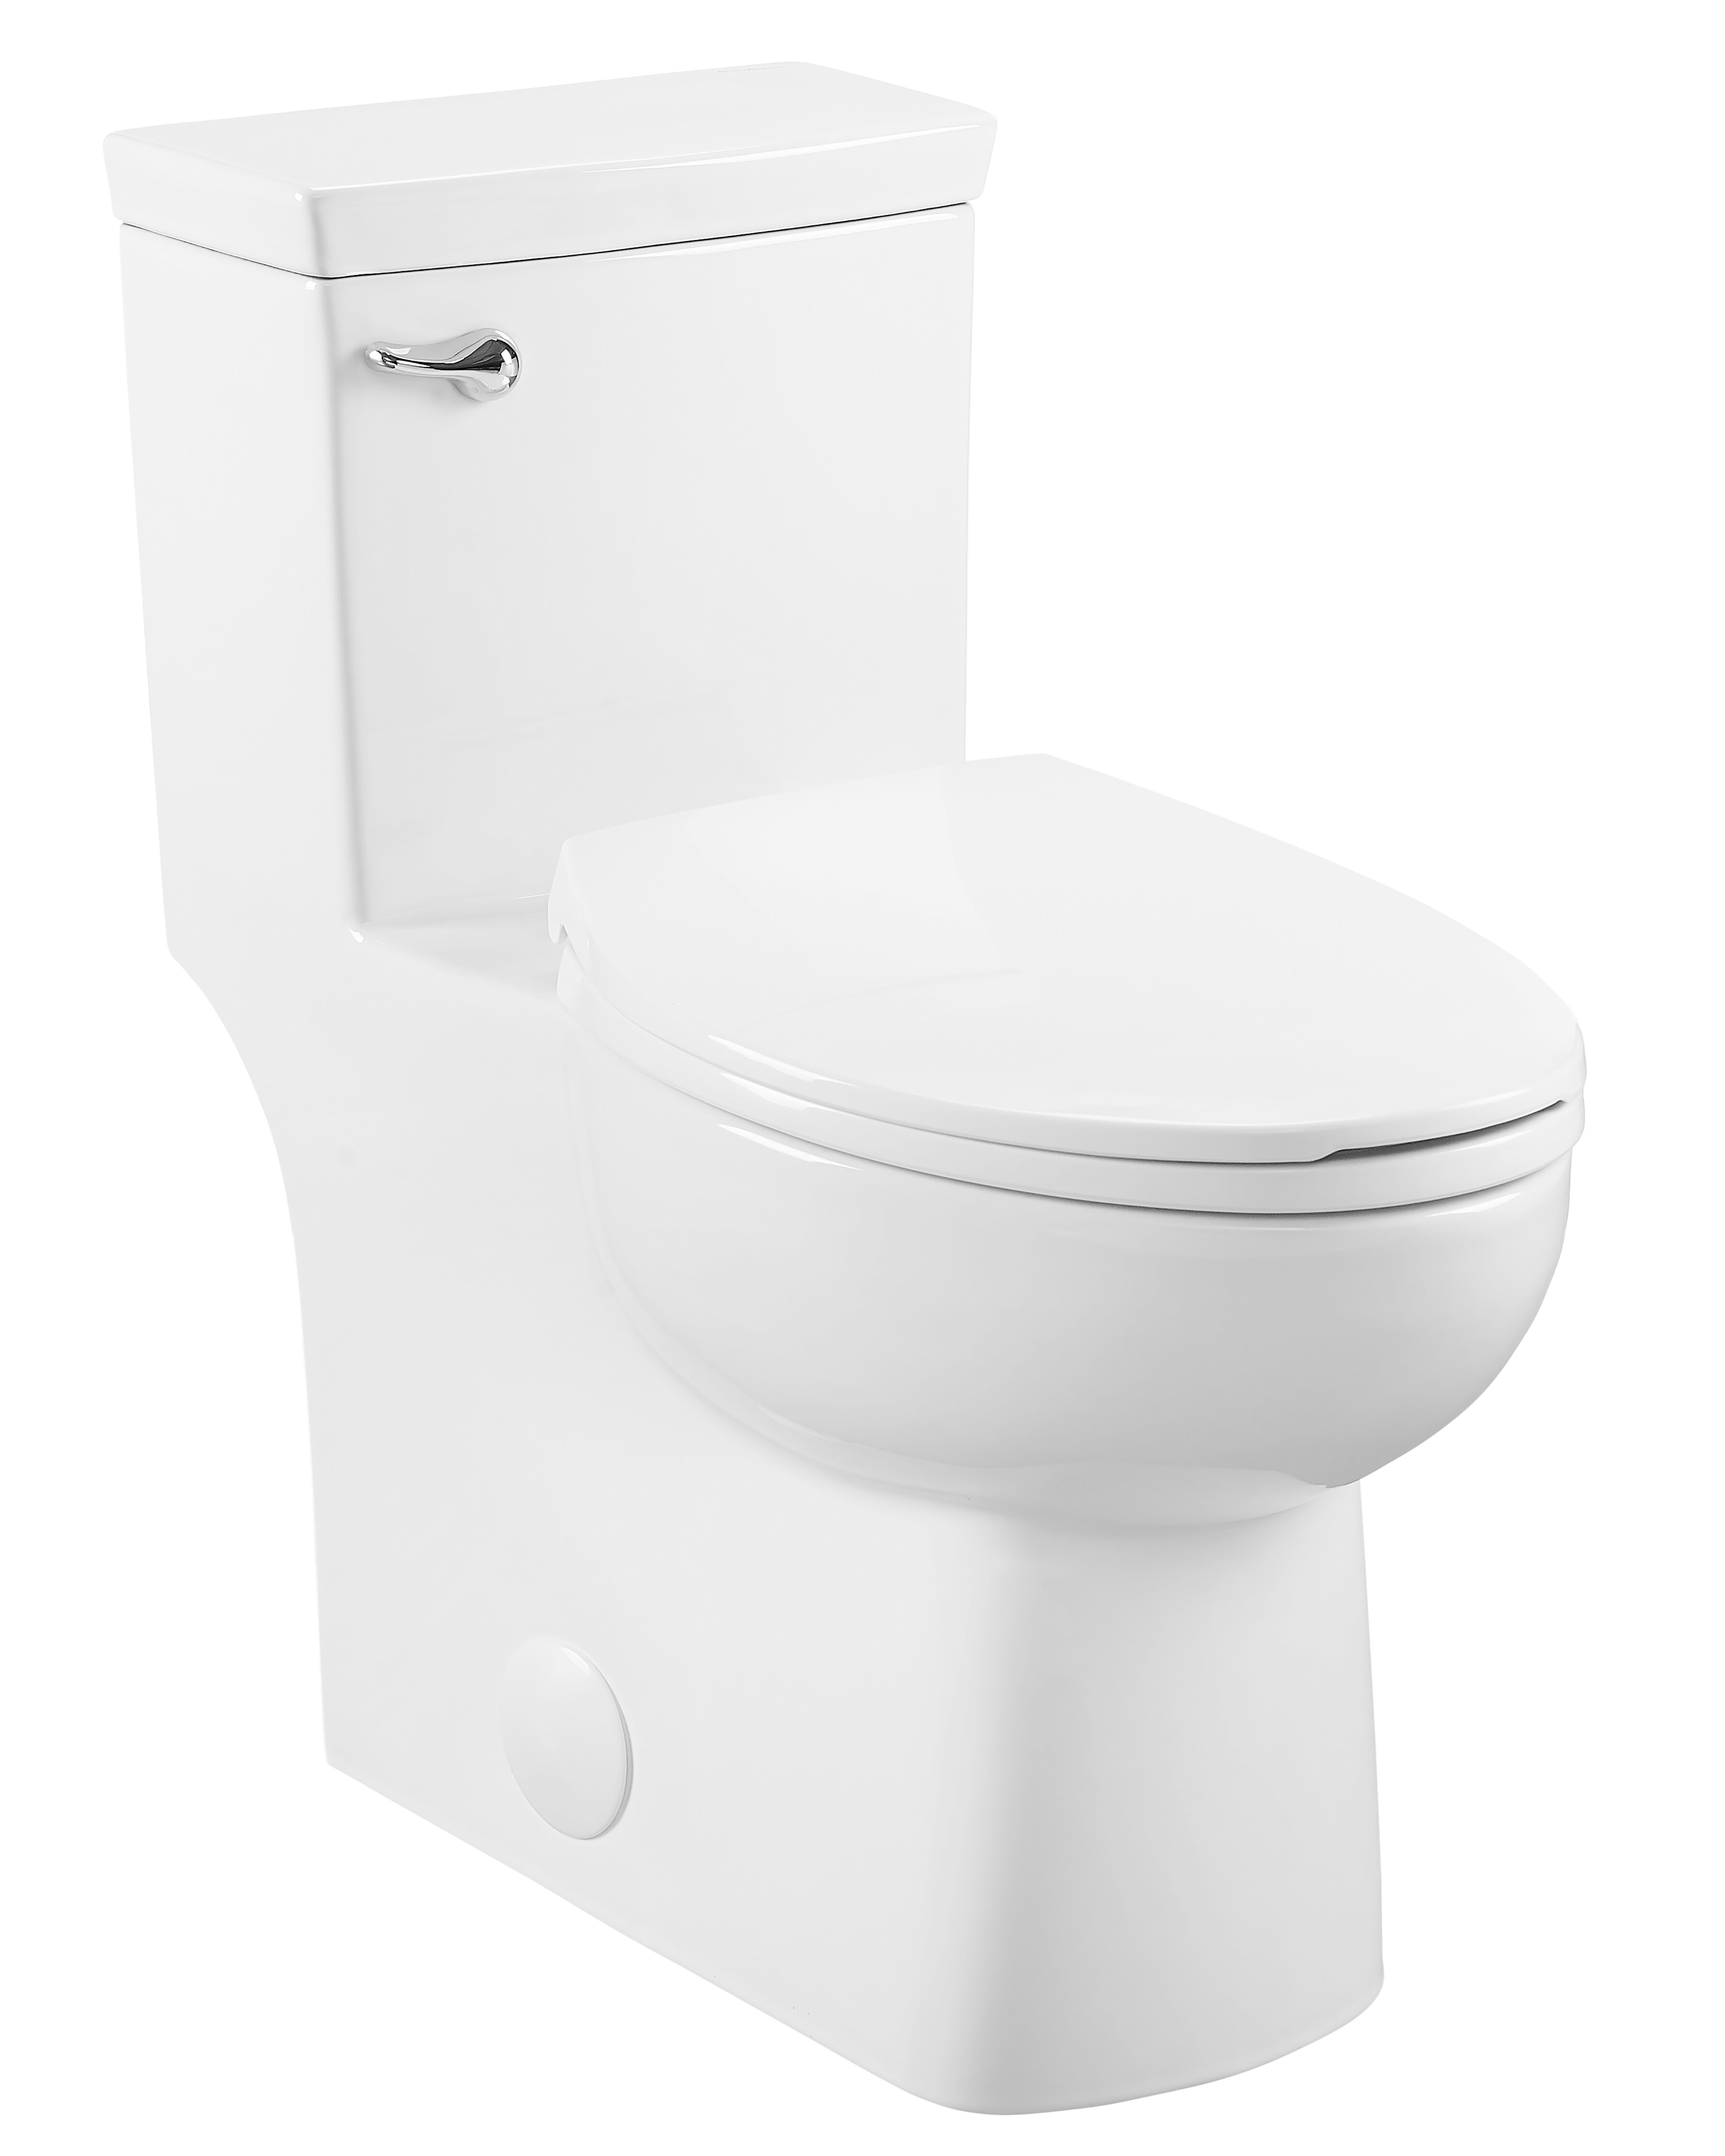 Swiss Madison Classe 1 28 Gpf Water Efficient Elongated One Piece Toilet Seat Included Reviews Wayfair